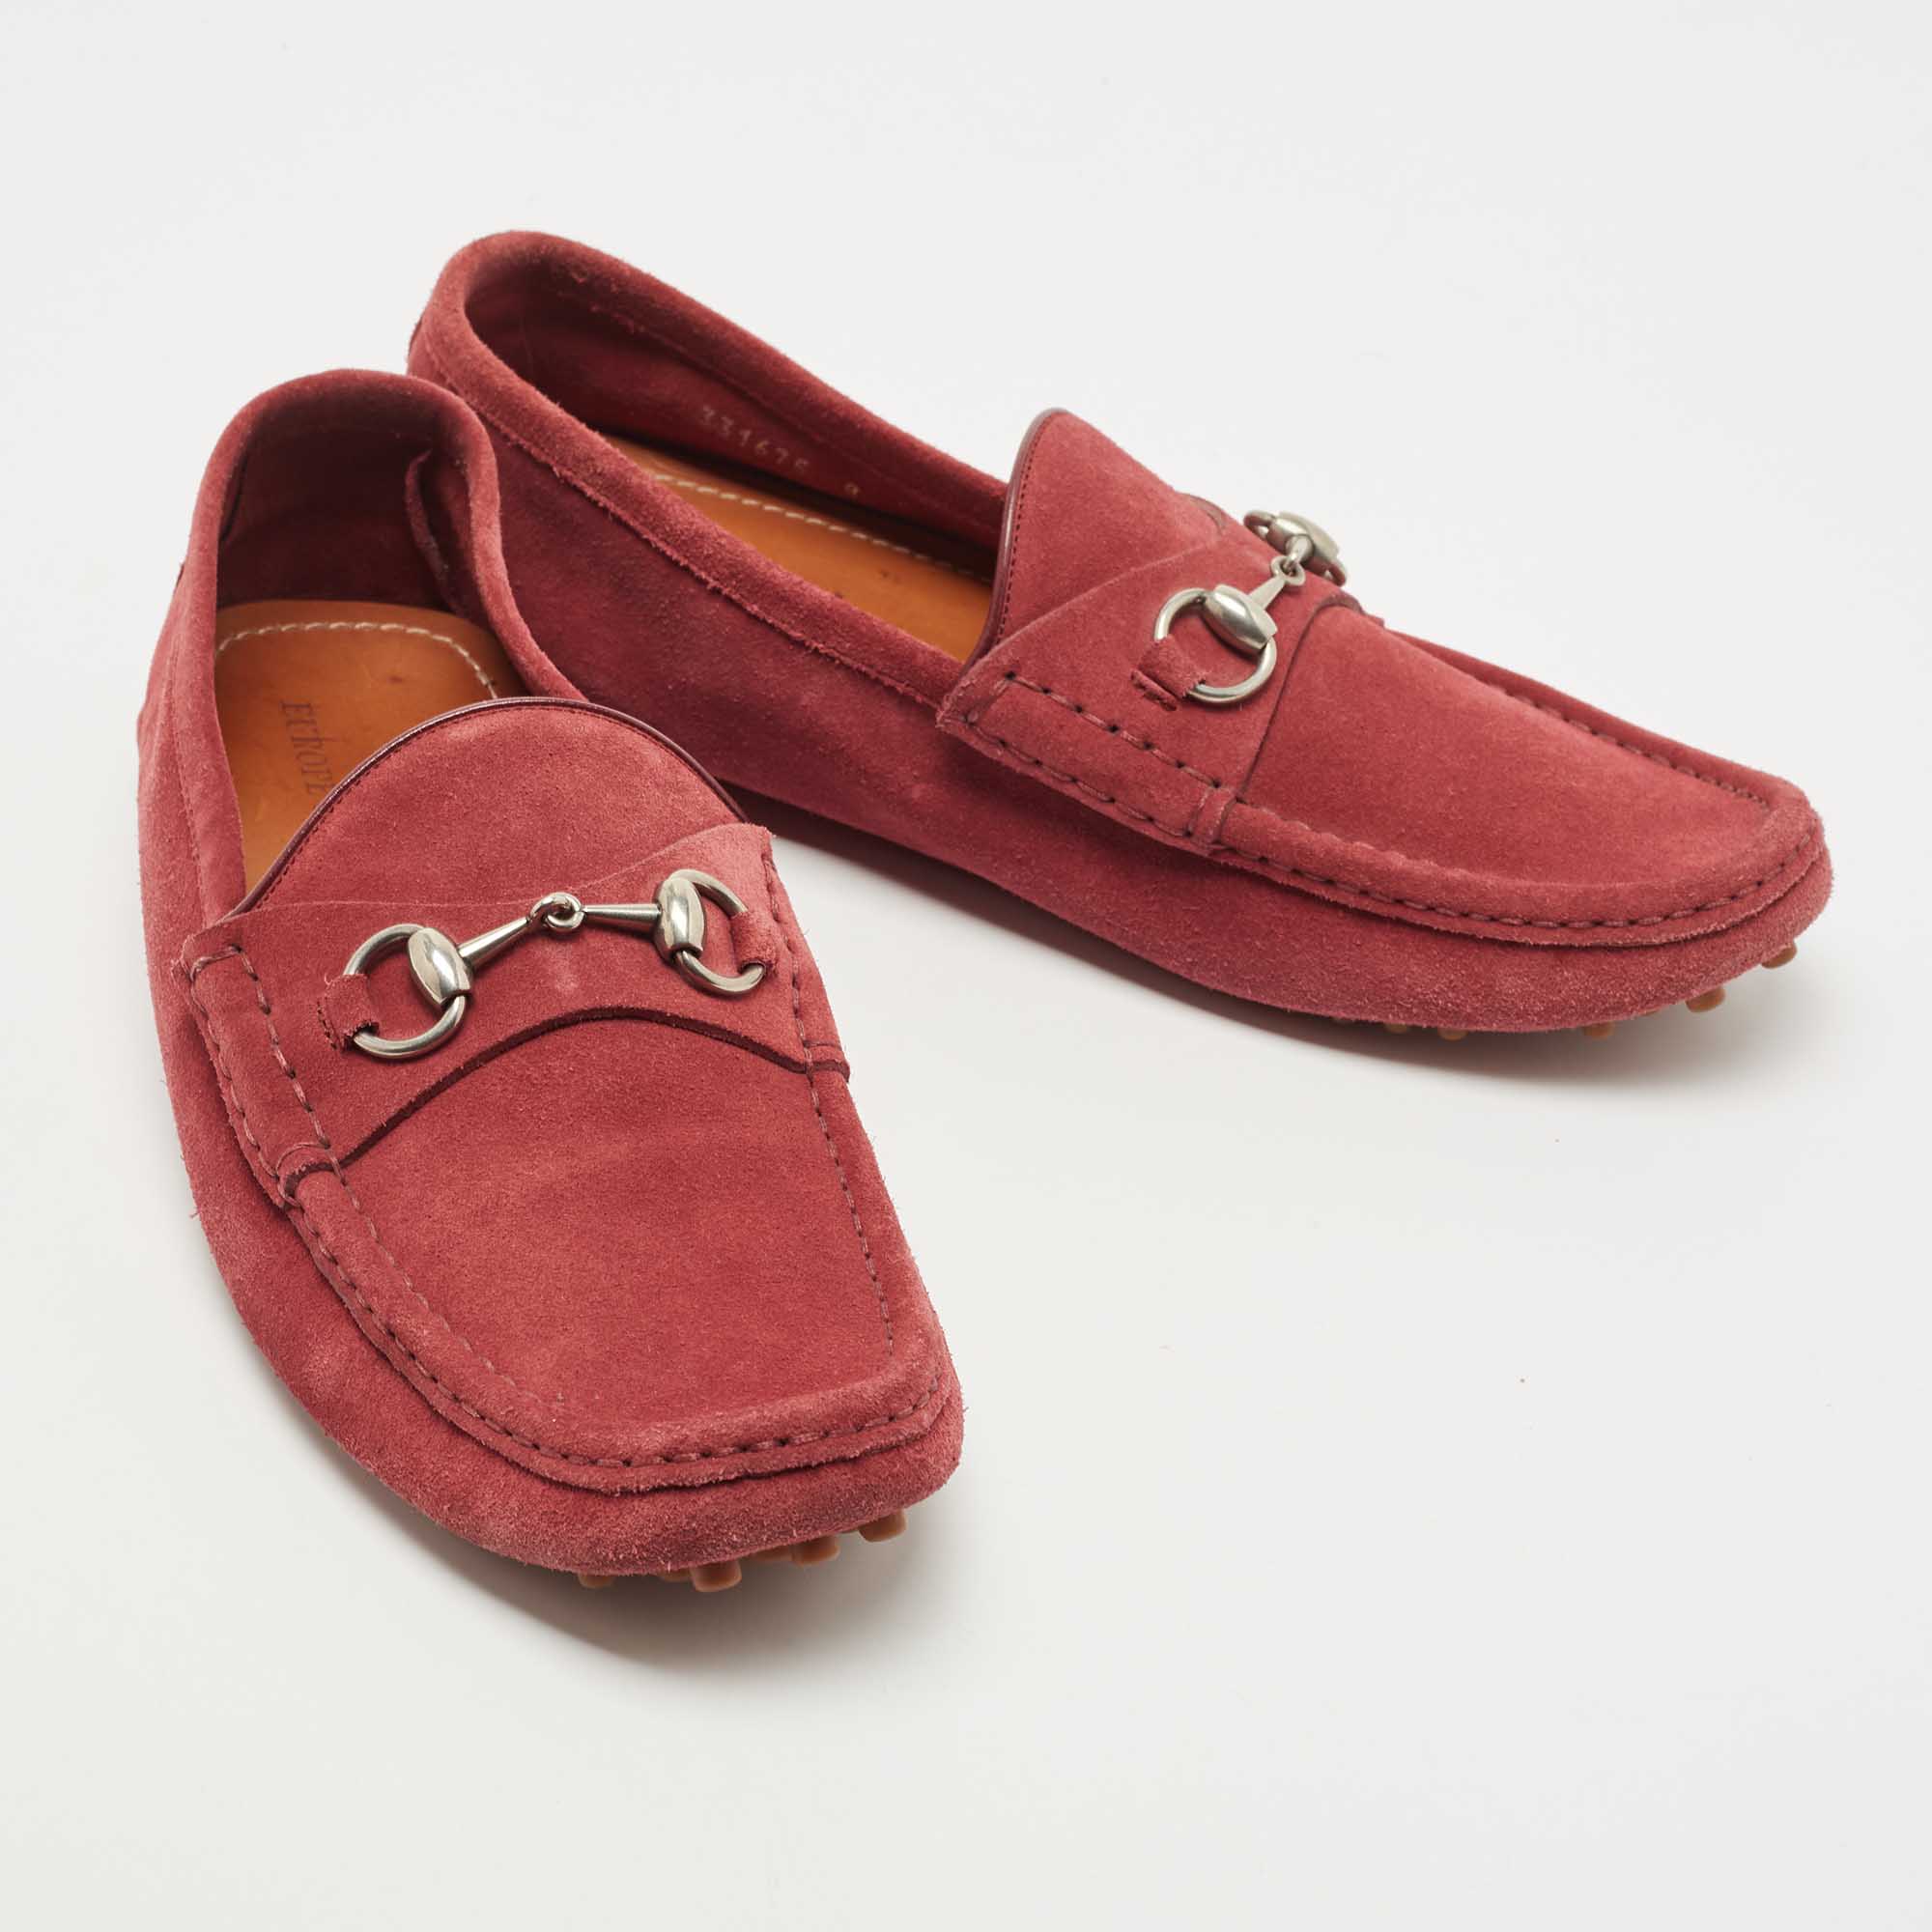 Suede Horsebit Slip On Loafers Size Gucci TLC